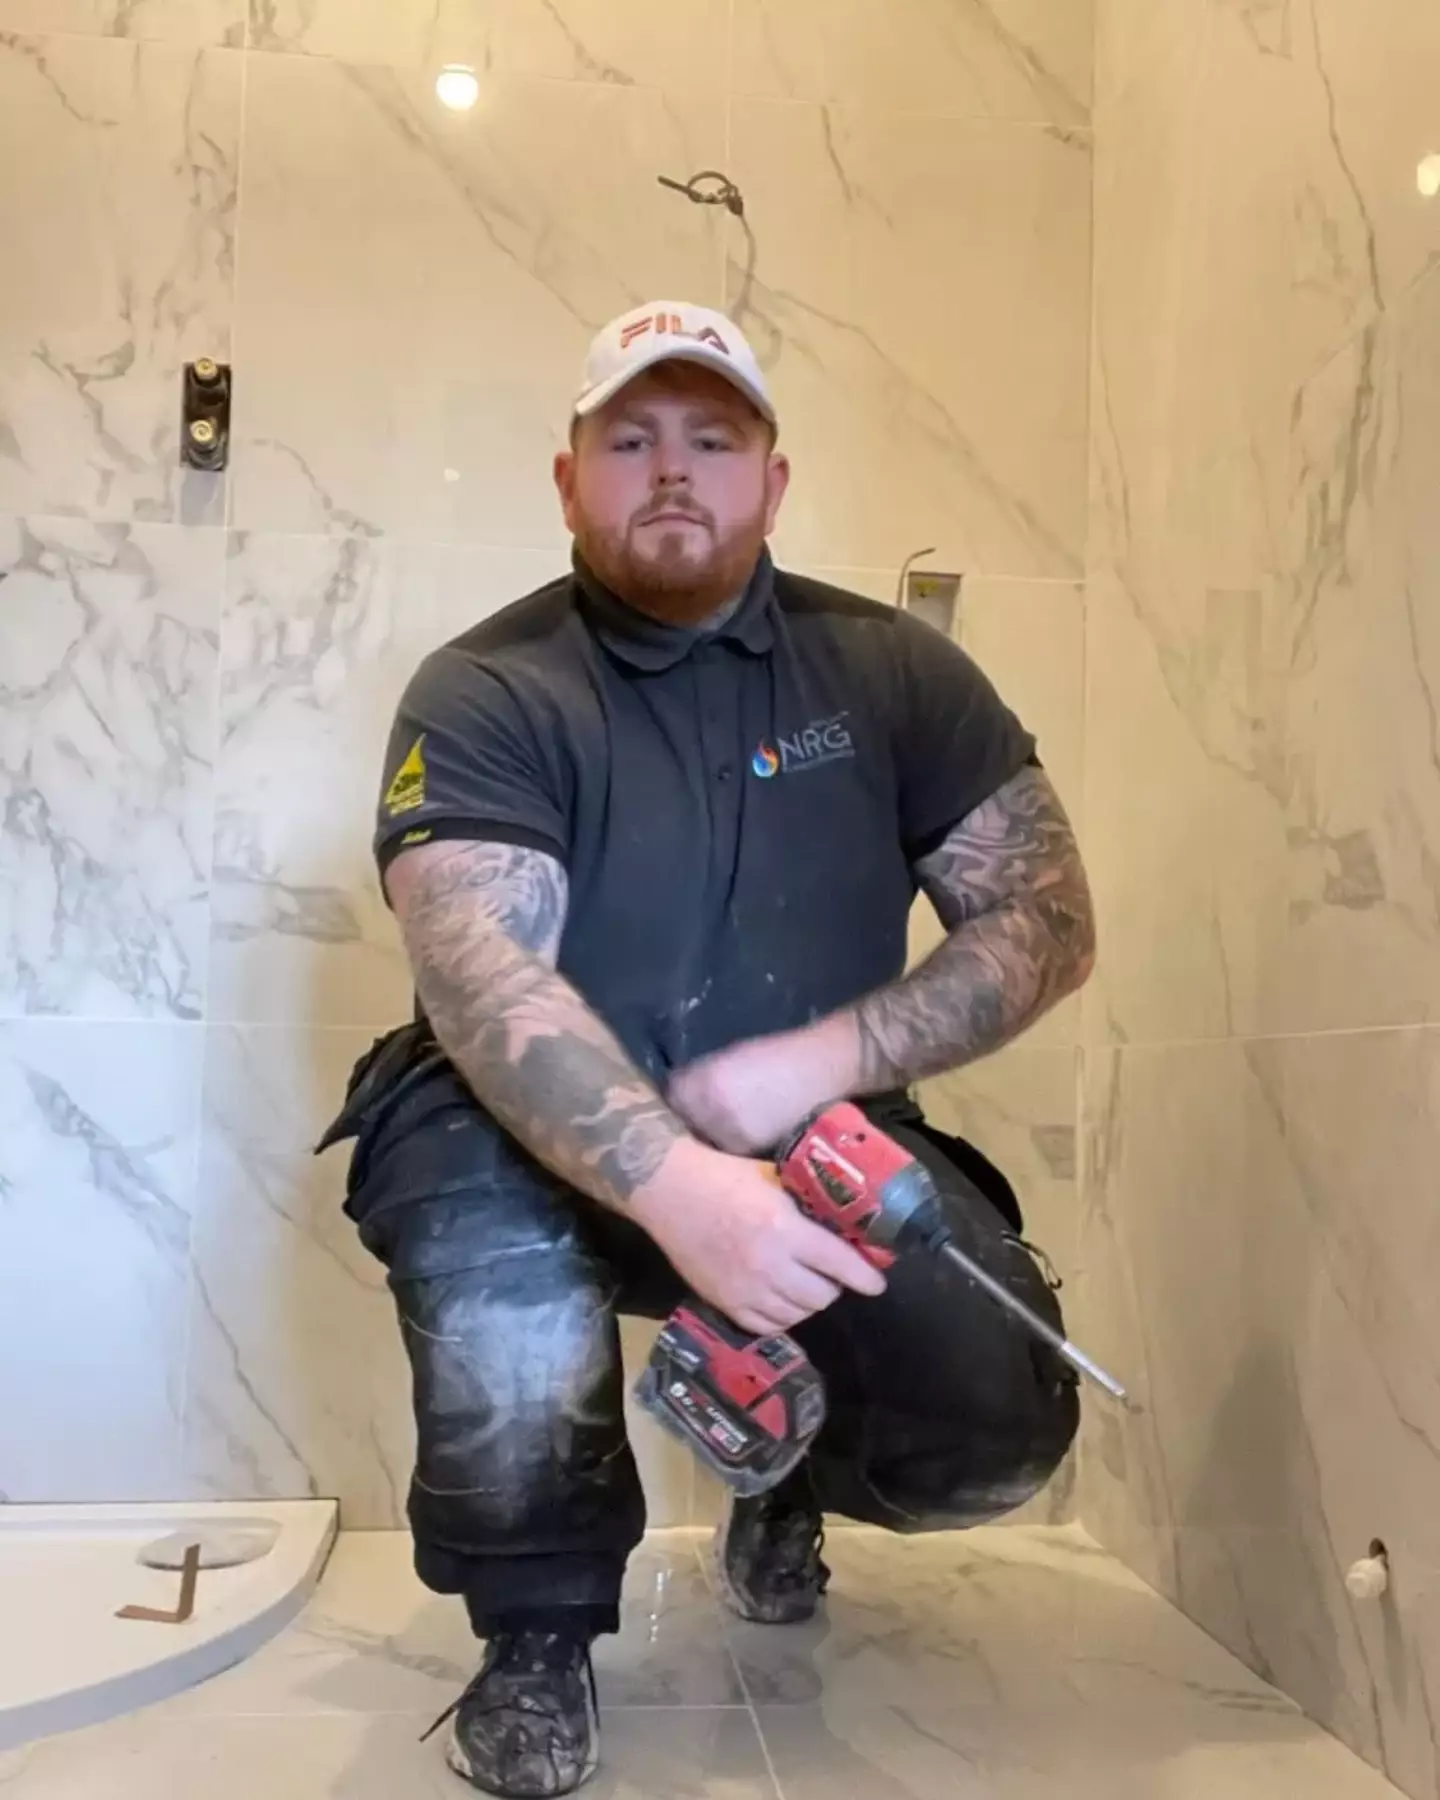 Hoehle regularly answers questions and shares insights into his day to day plumbing business on his TikTok.